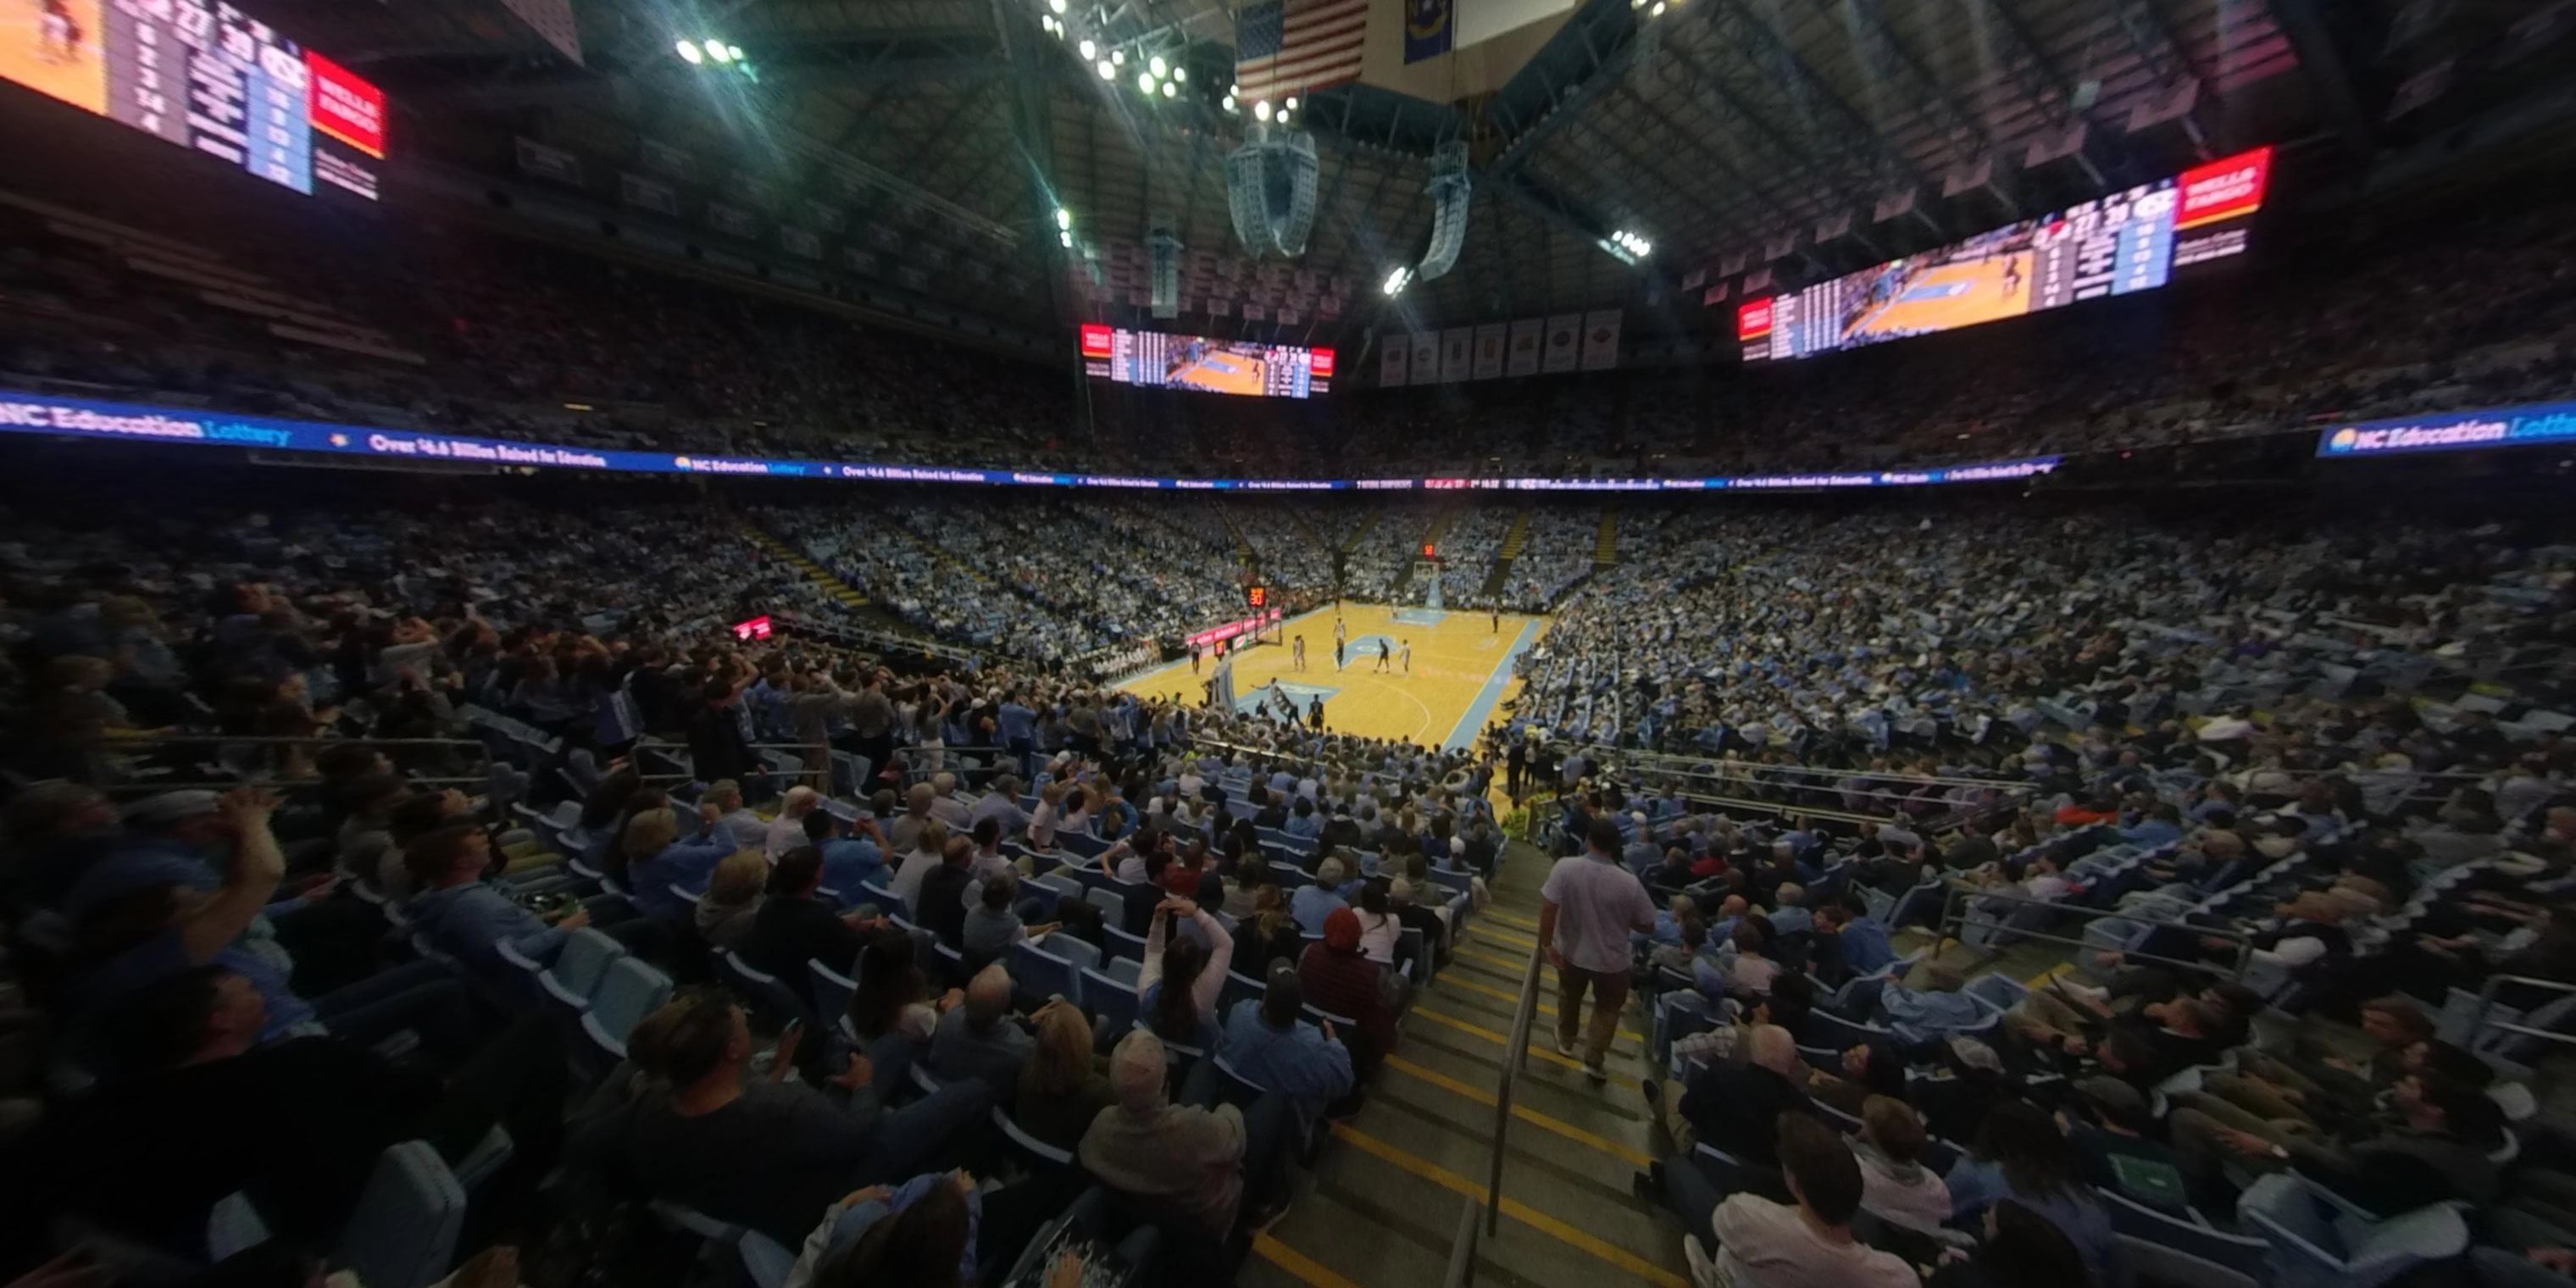 section 118 panoramic seat view  - dean smith center